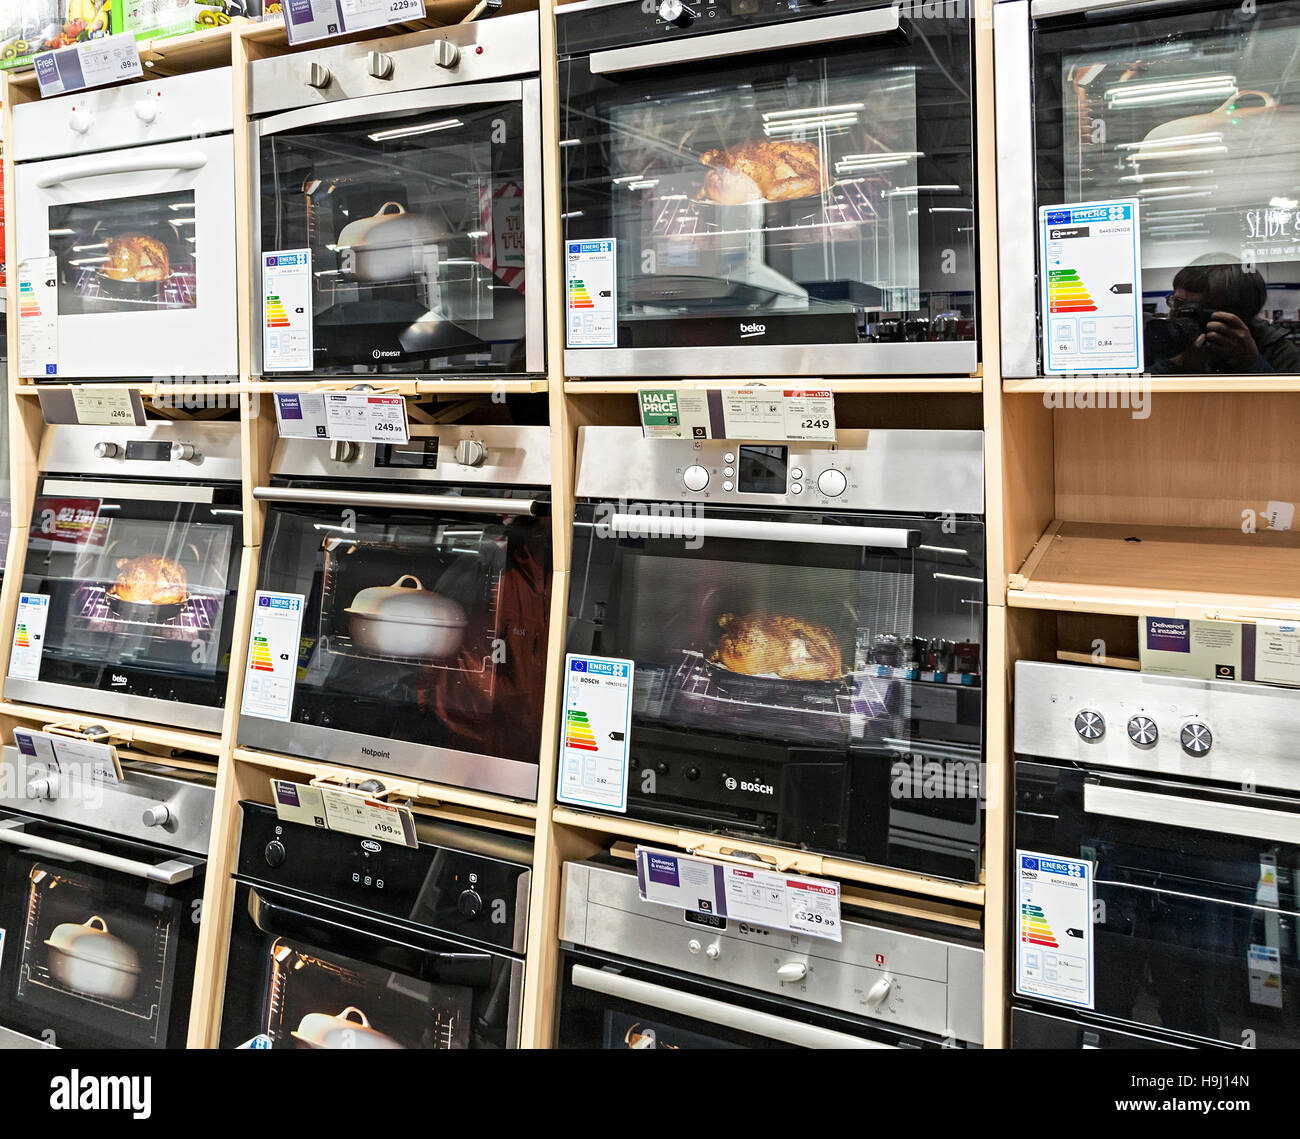 Electric ovens on sale with energy rating labels, UK Stock Photo